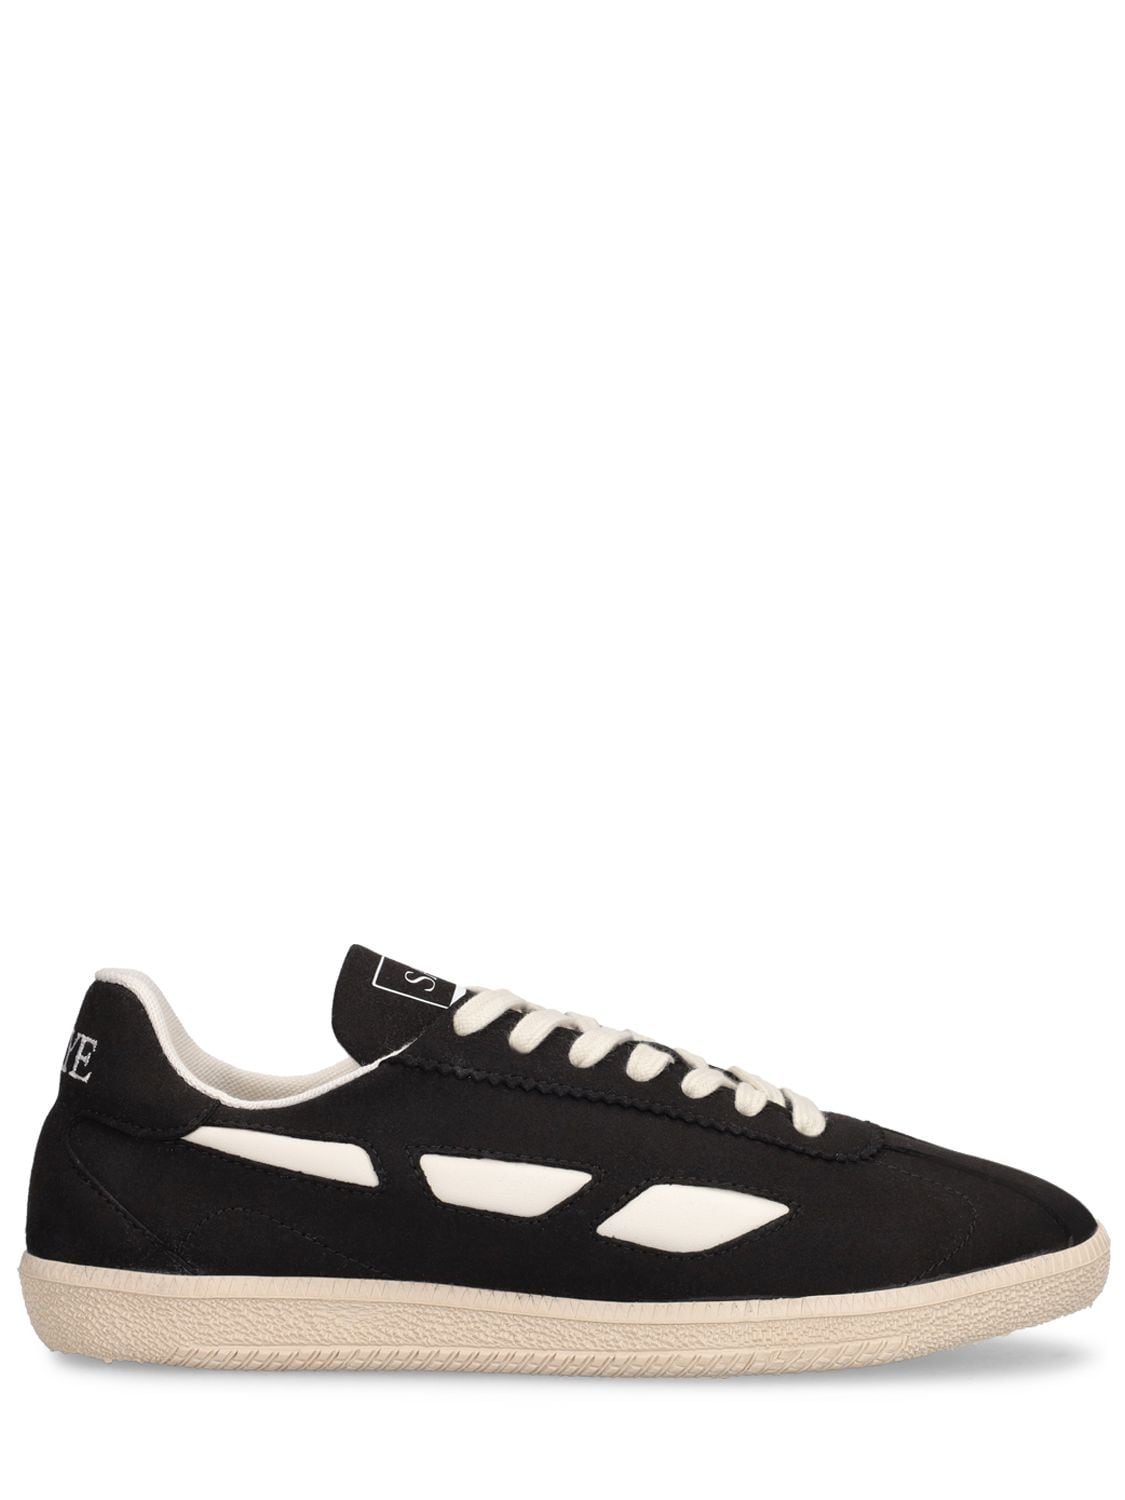 Saye Modelo '70 Vegan Trainers In Black At Urban Outfitters | ModeSens